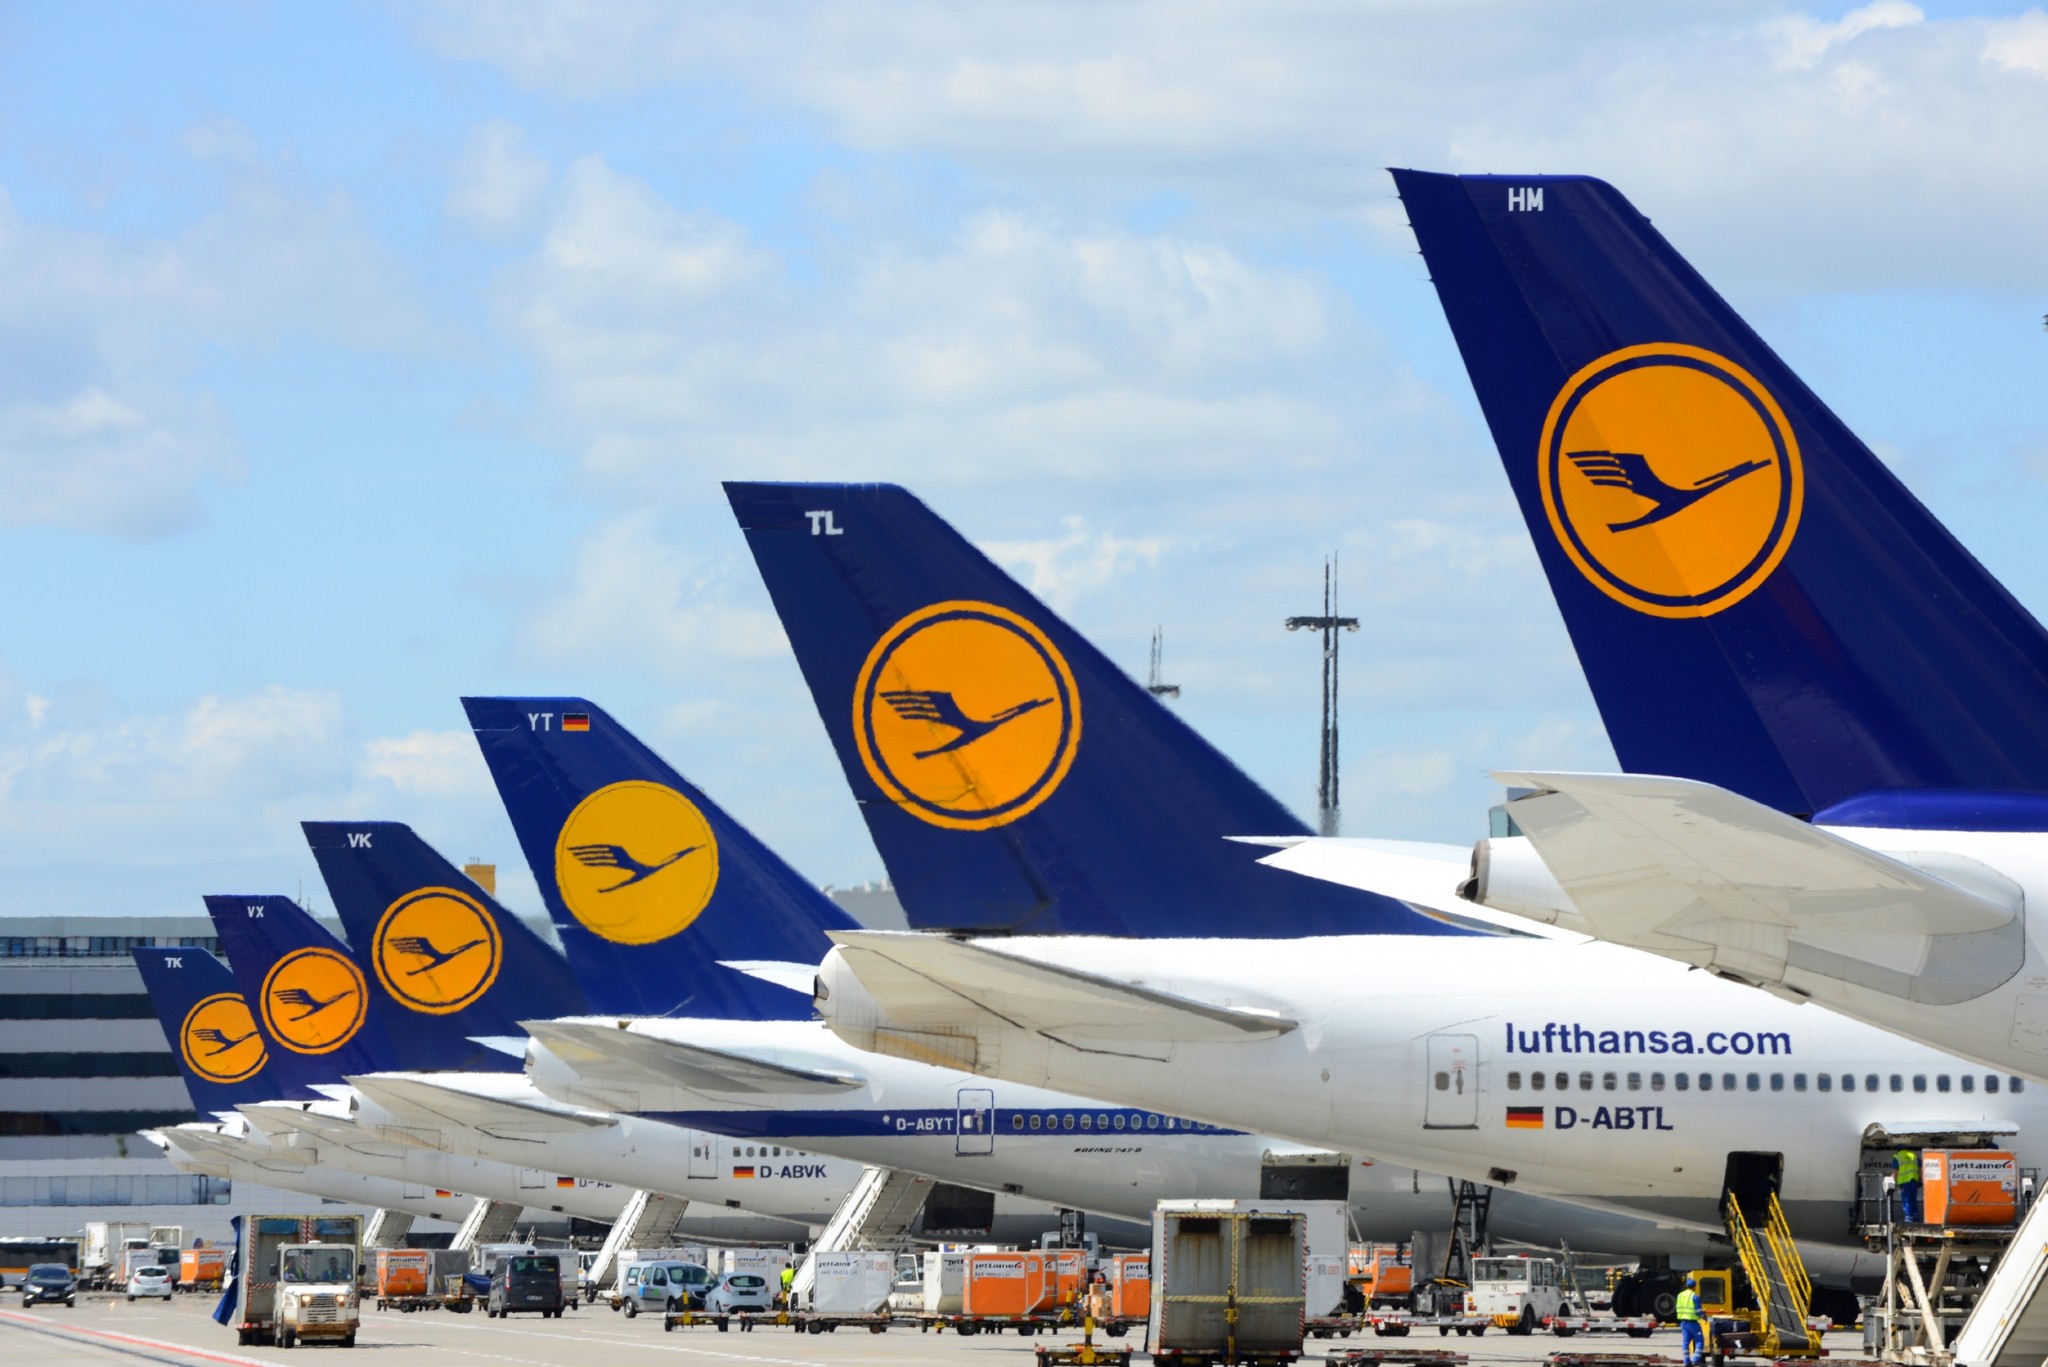 Lufthansa Group scales back winter schedule; posts quarter loss